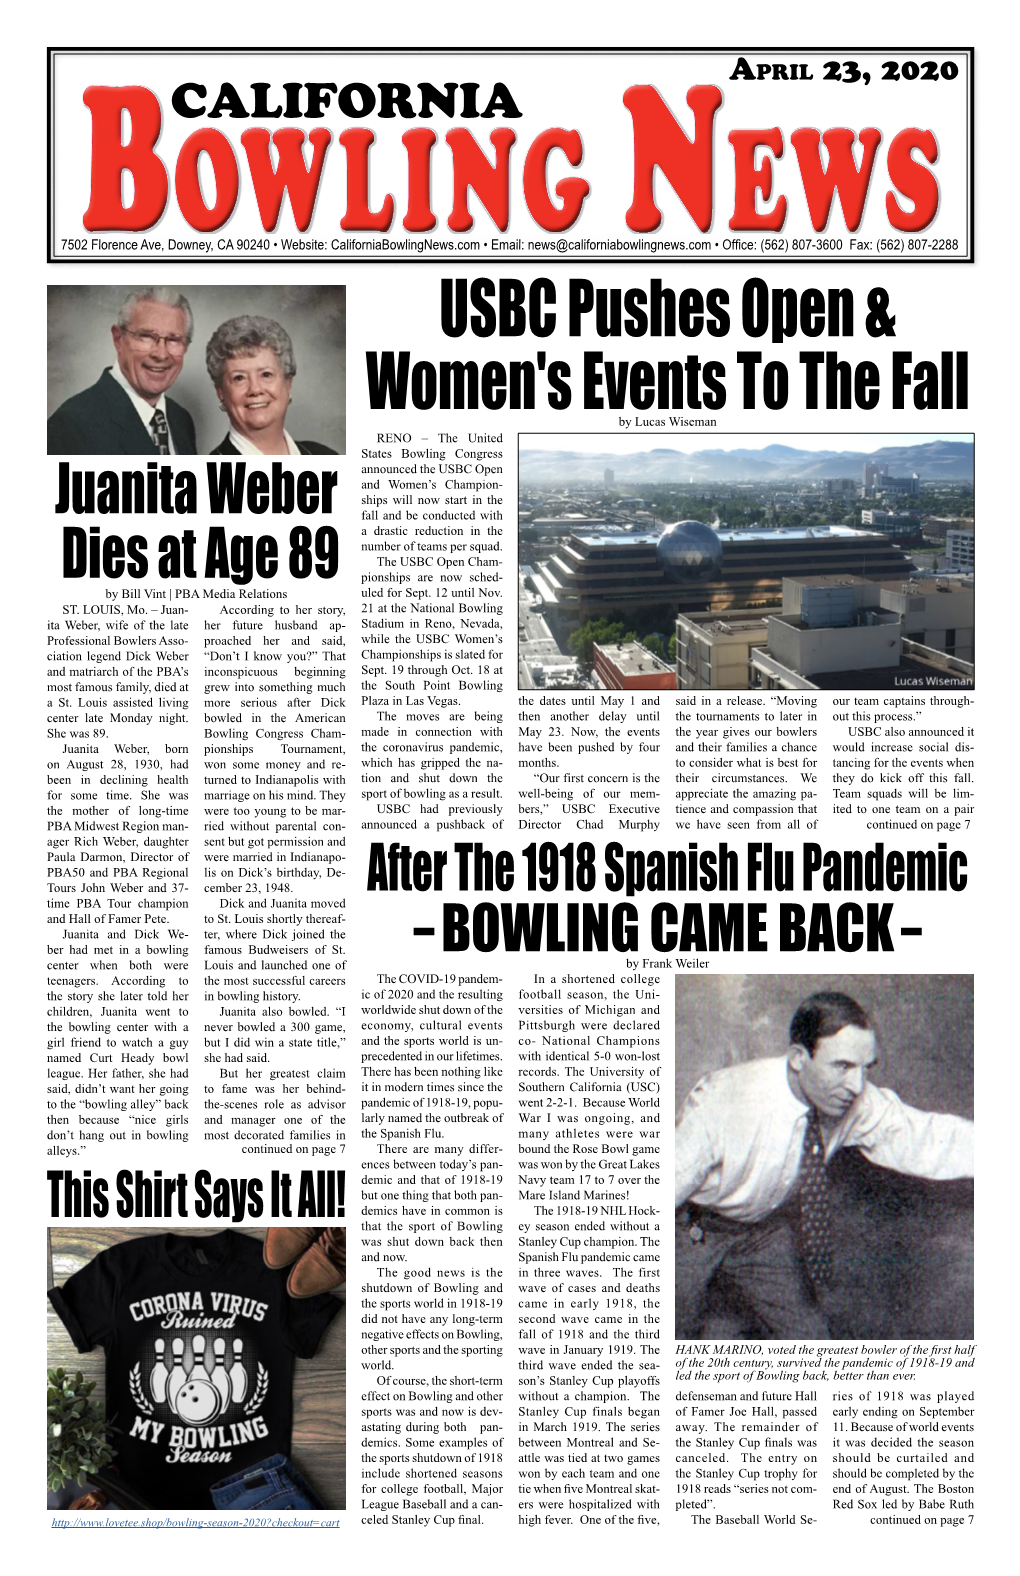 USBC Pushes Open & Women's Events to the Fall